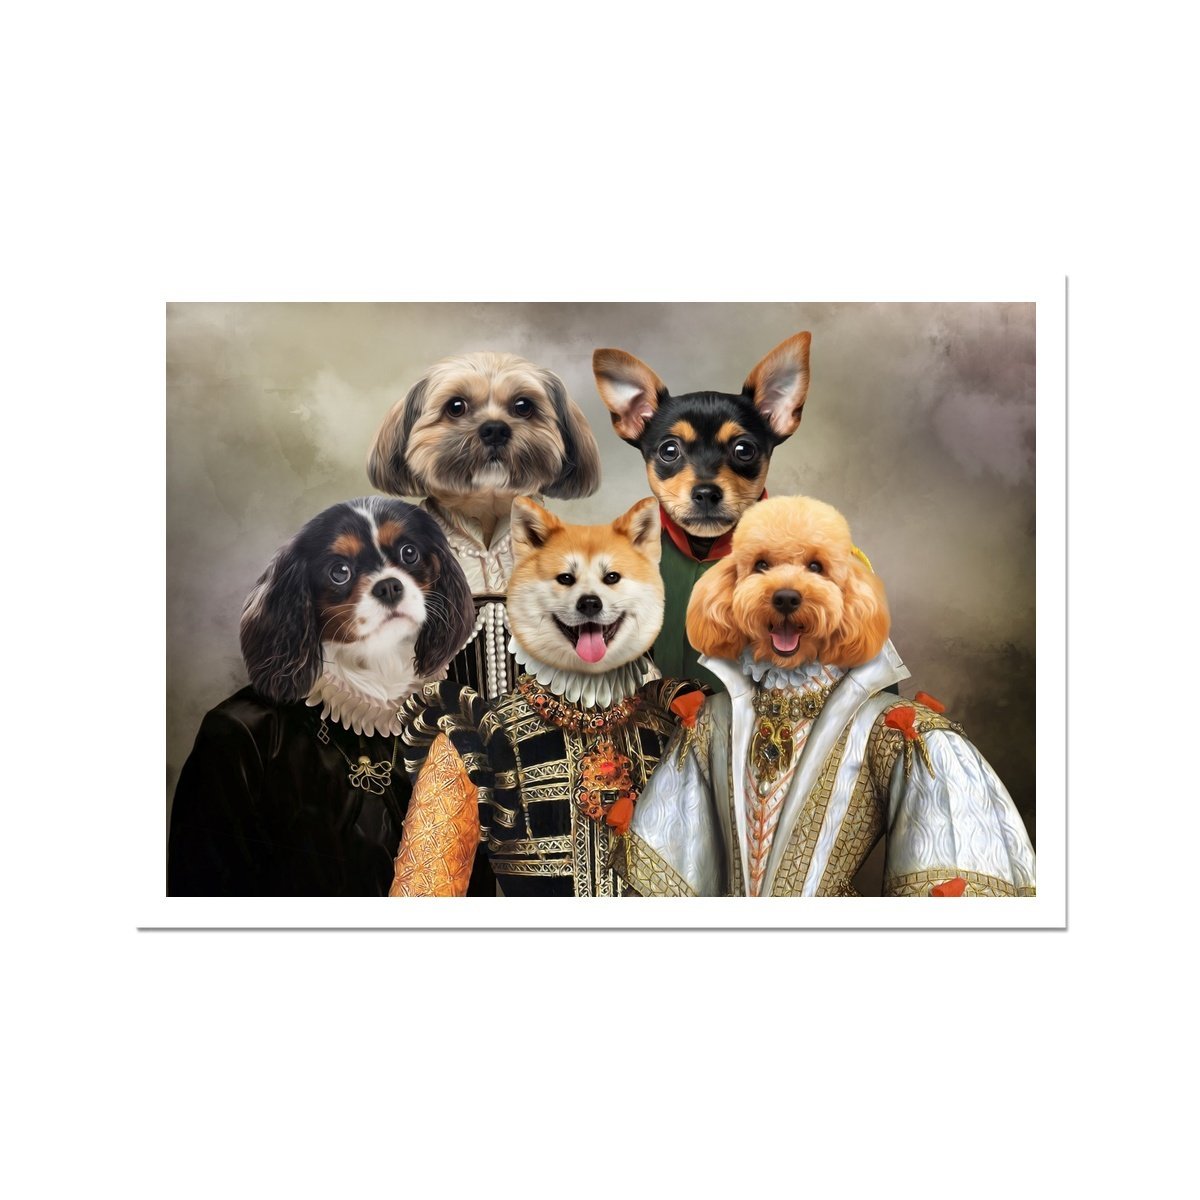 The Dignified 5: Custom Pet Poster - Paw & Glory - #pet portraits# - #dog portraits# - #pet portraits uk#Paw & Glory, paw and glory, pet pawtraits online personalised pet art, cat royalty painting pet portrait photography, dog renaissance painting, renaissance pet portraits uk pet portraits